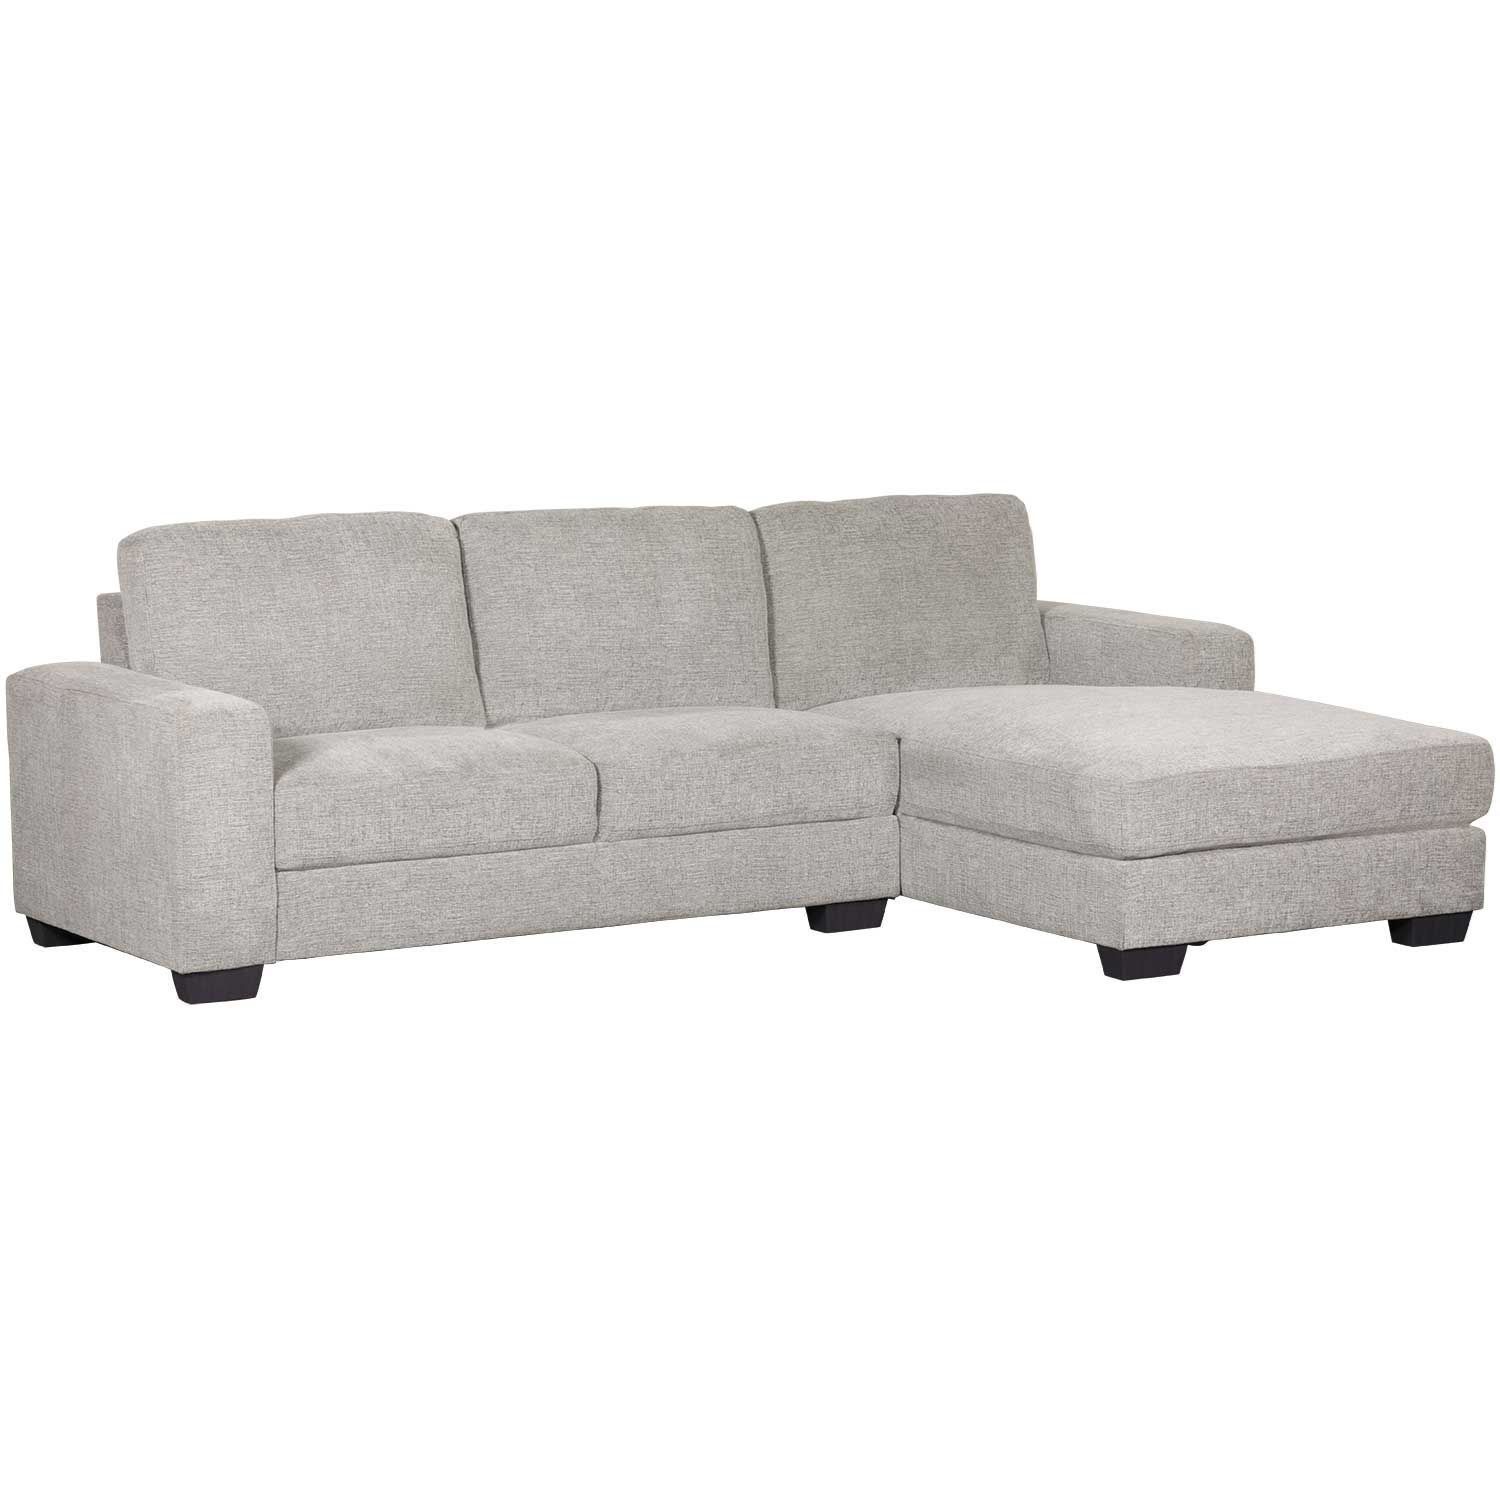 Charleston Dark Gray 2 Piece Sectional | | Lifestyle Within 2pc Crowningshield Contemporary Chaise Sofas Light Gray (View 13 of 15)